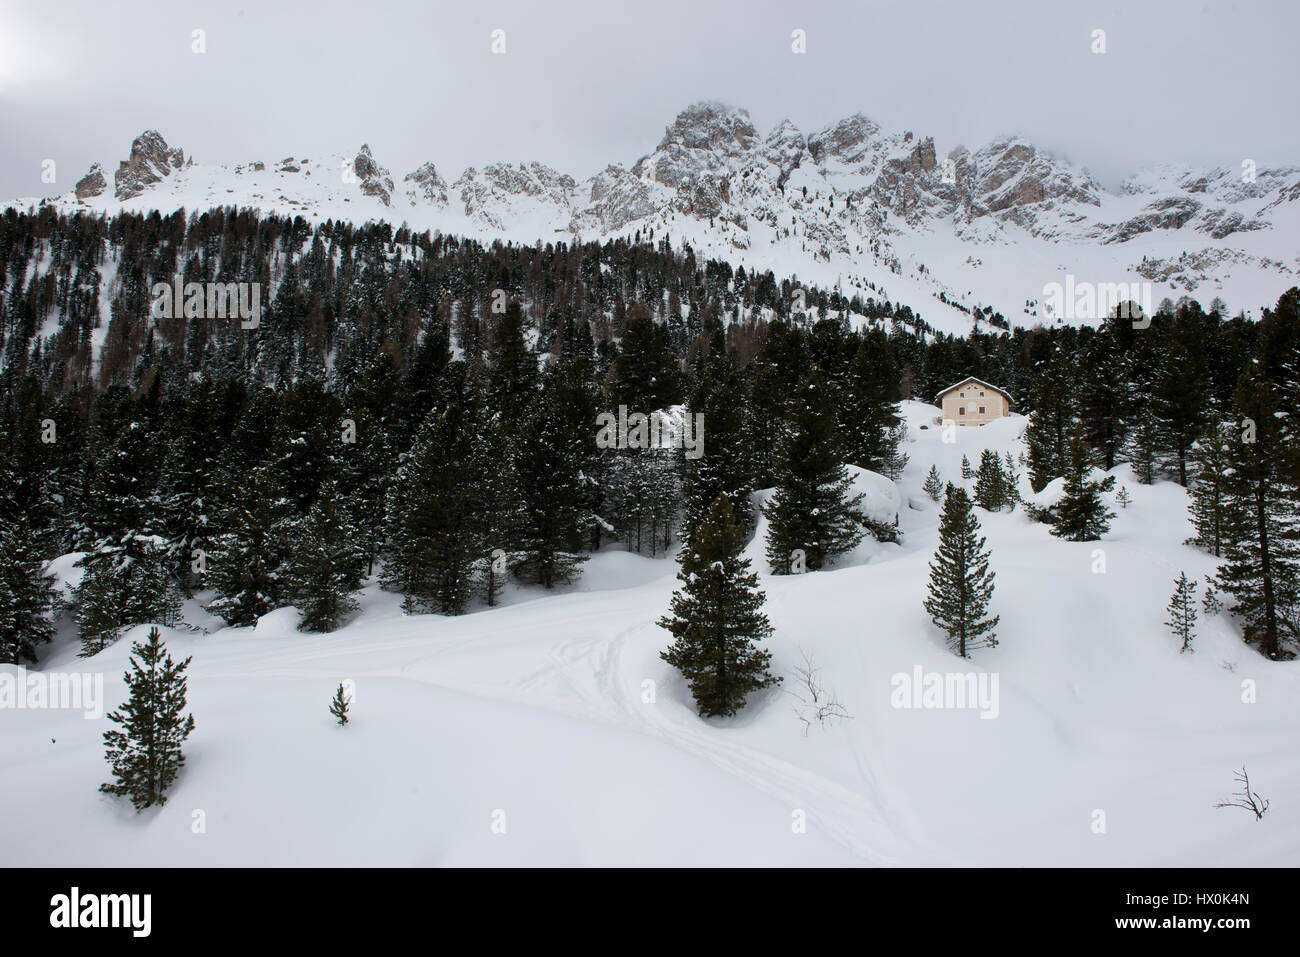 The idyllic panorama of the snowy forest and peaks in the Dolomiti. Stock Photo